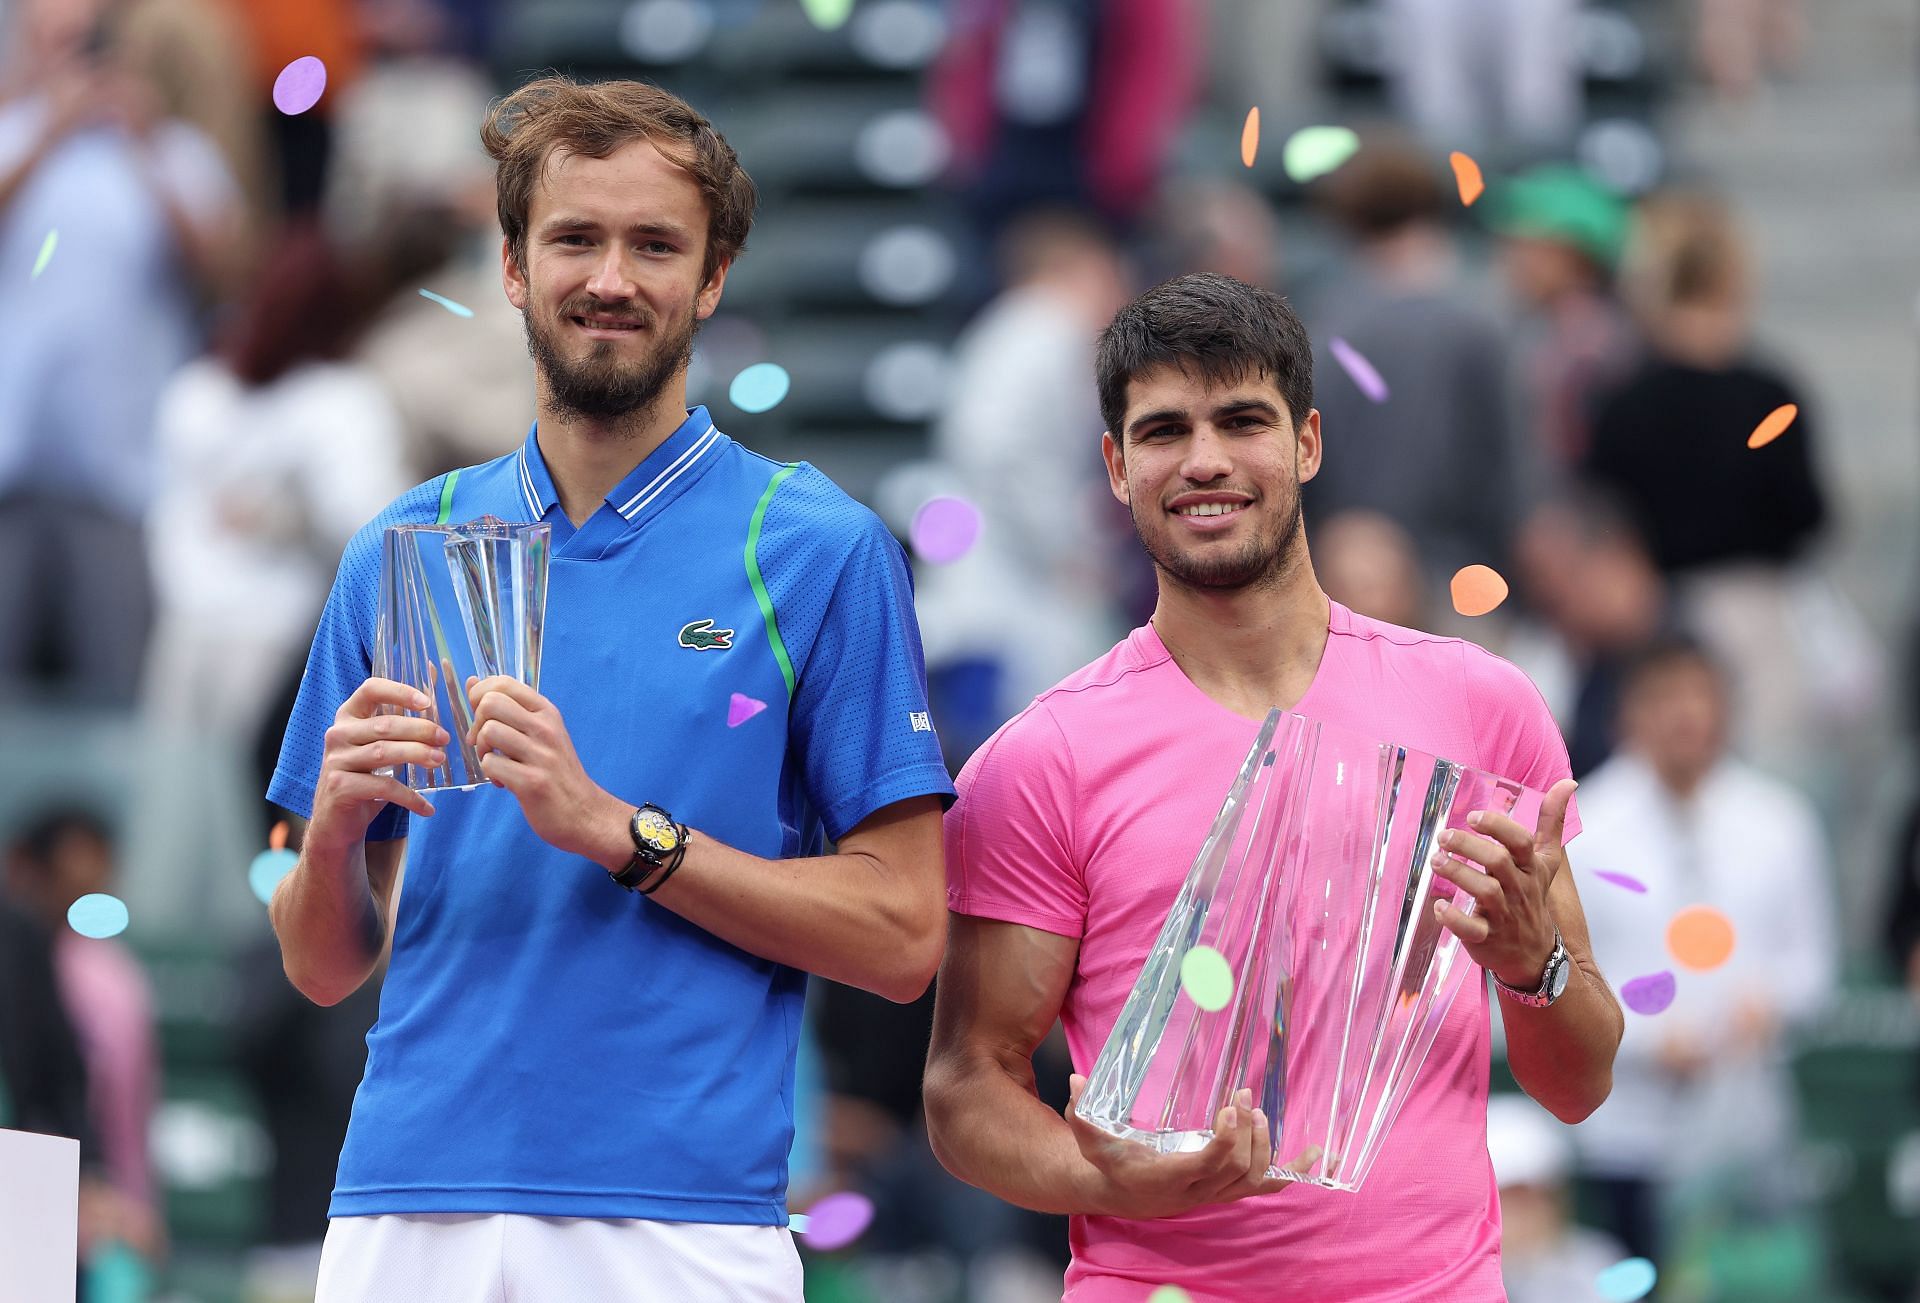 Alcaraz was the 2023 BNP Paribas Open champion while Medvedev clinched the runner-up trophy